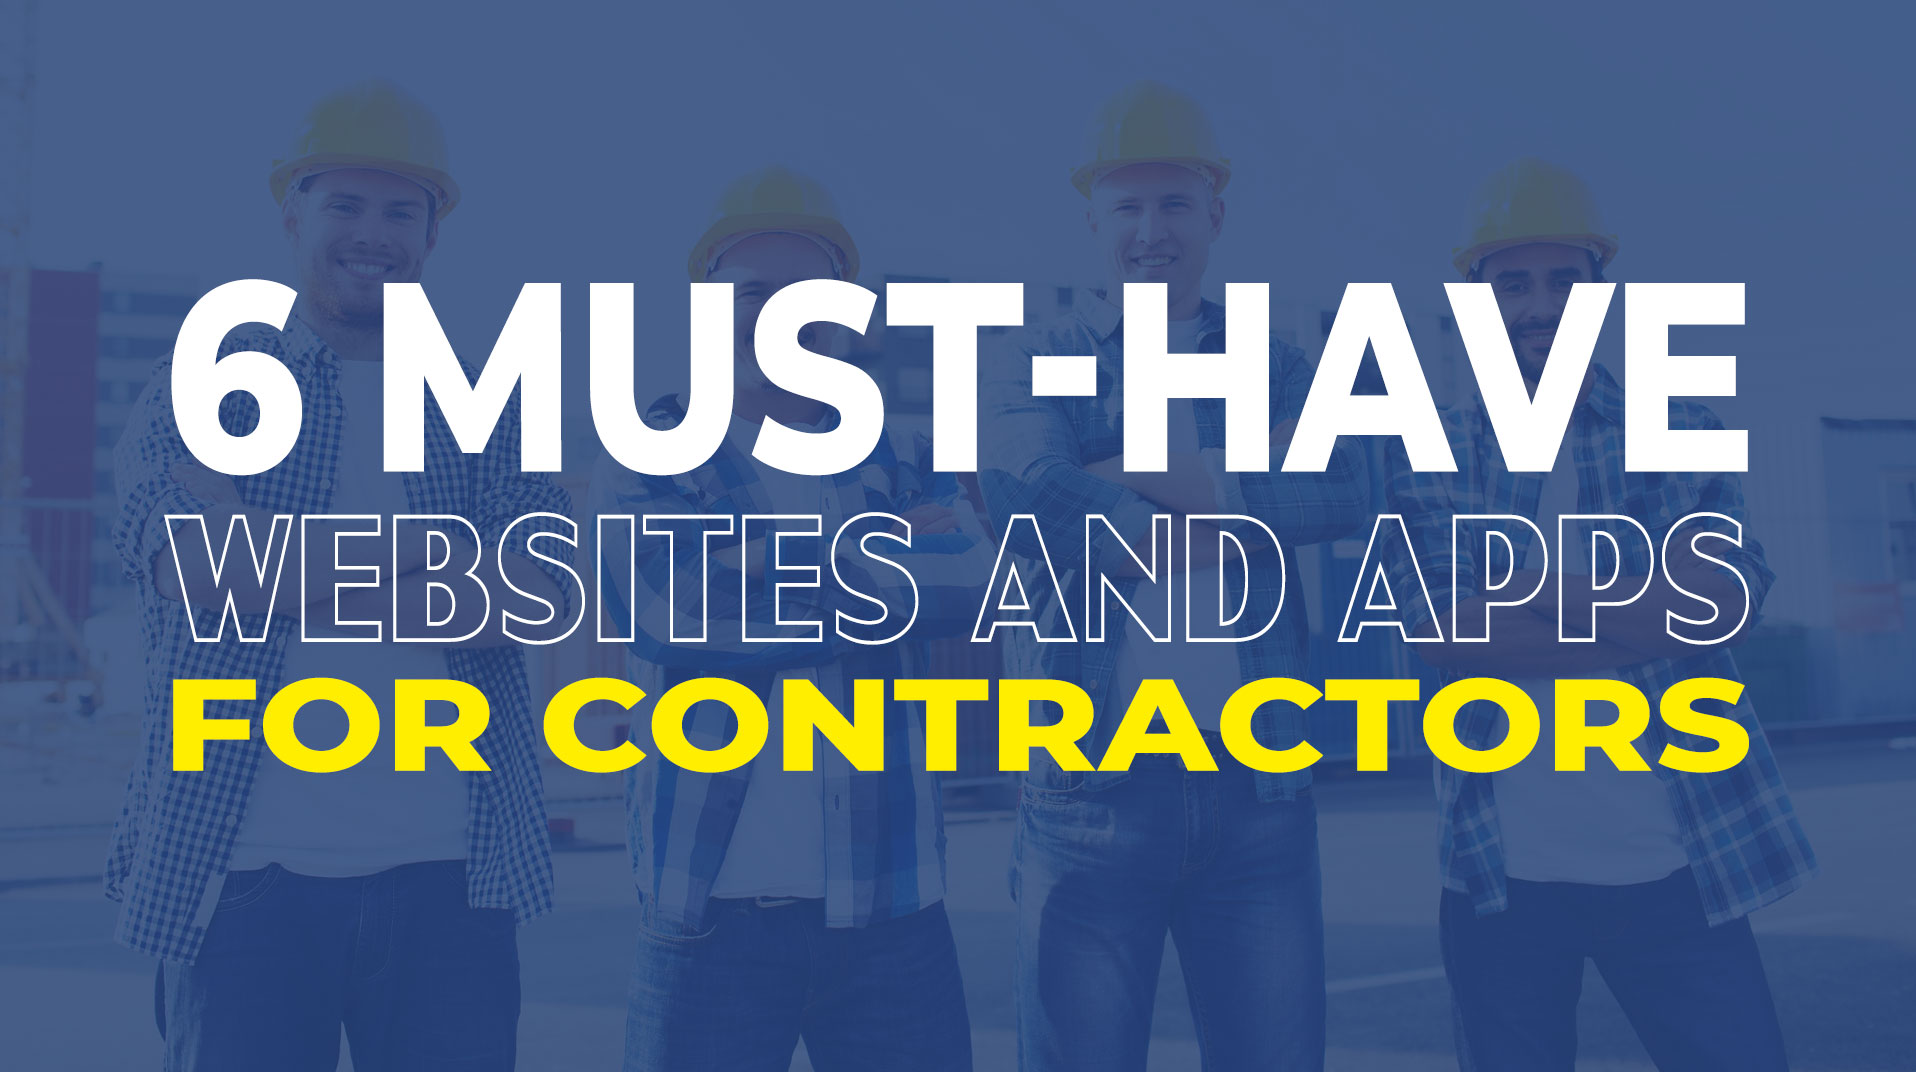 6 Must-Have Websites and Apps For Contractors